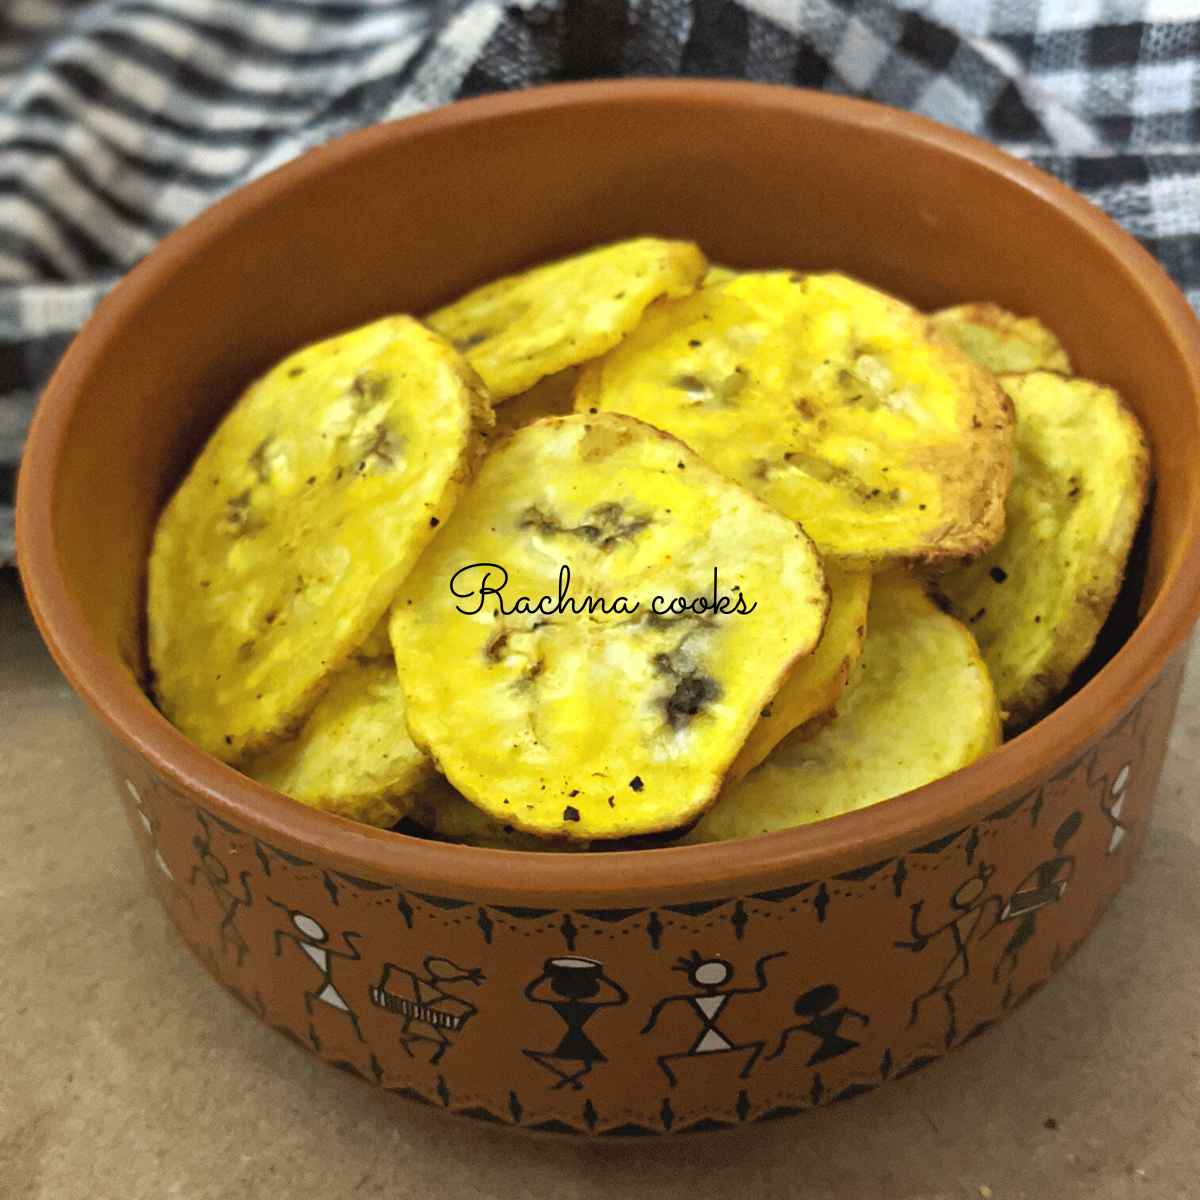 Golden plantain chips after air frying in a brown bowl.